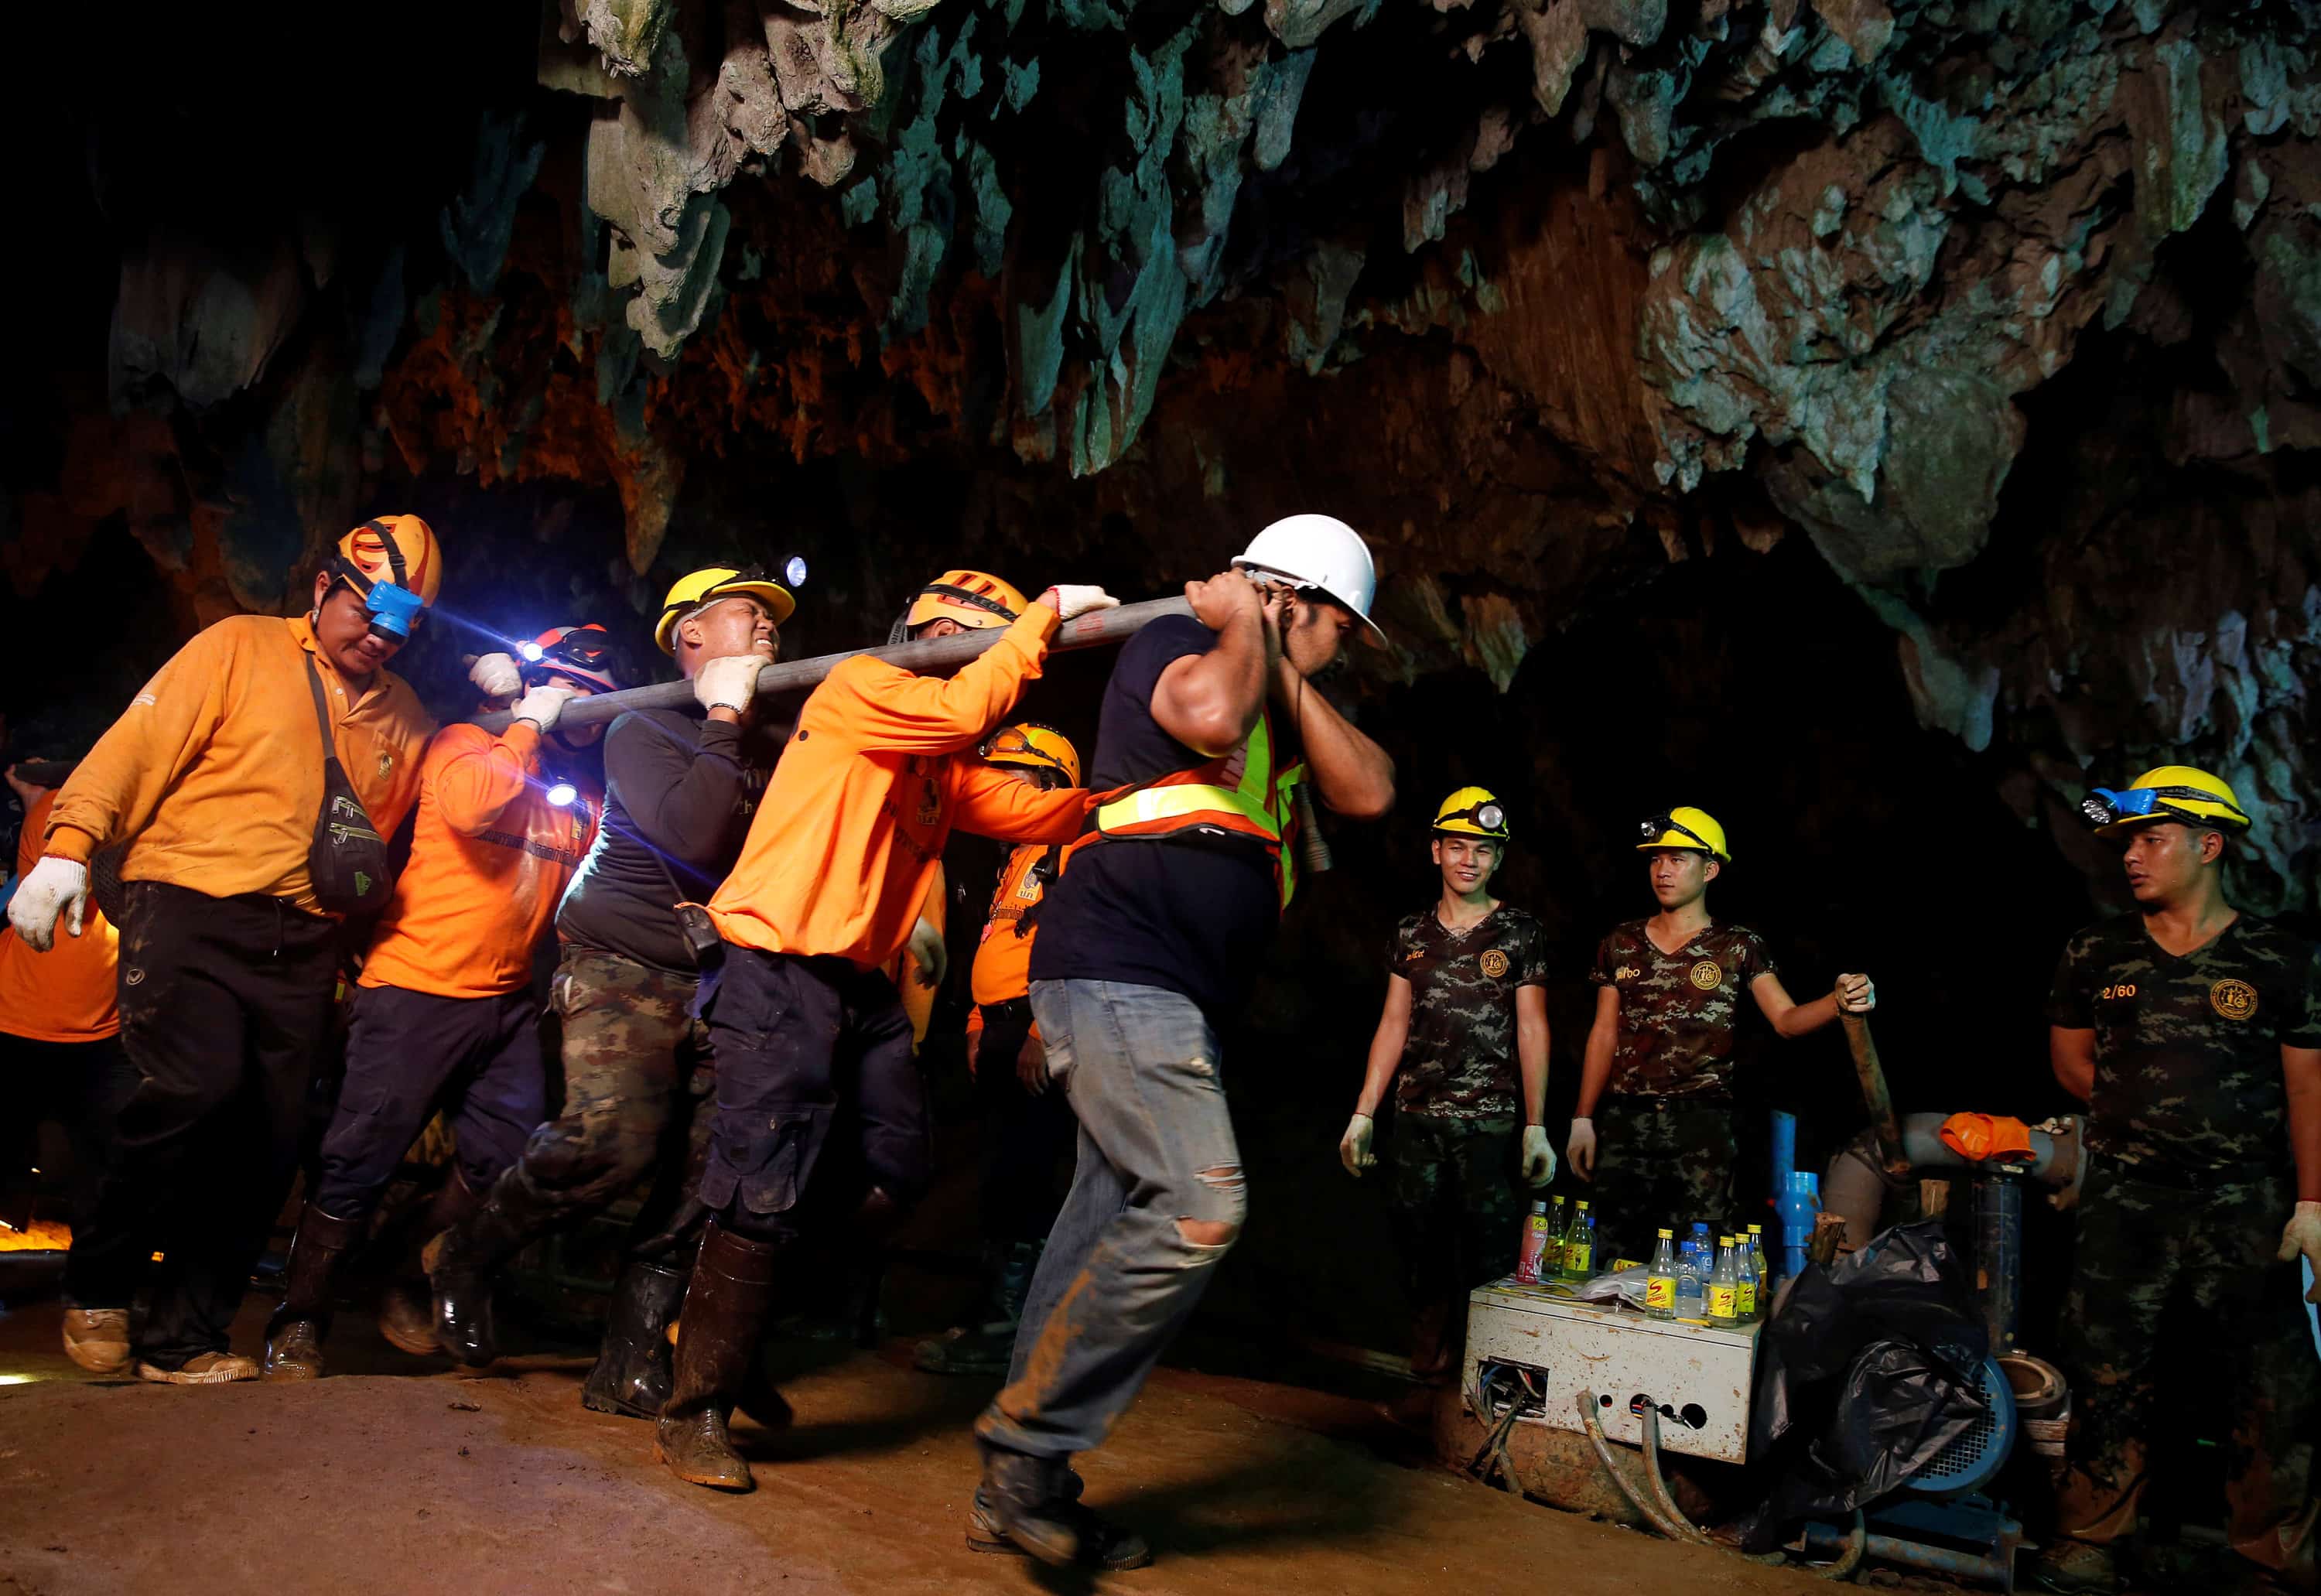 Could the Thai Cave Rescue, Rescue Us?